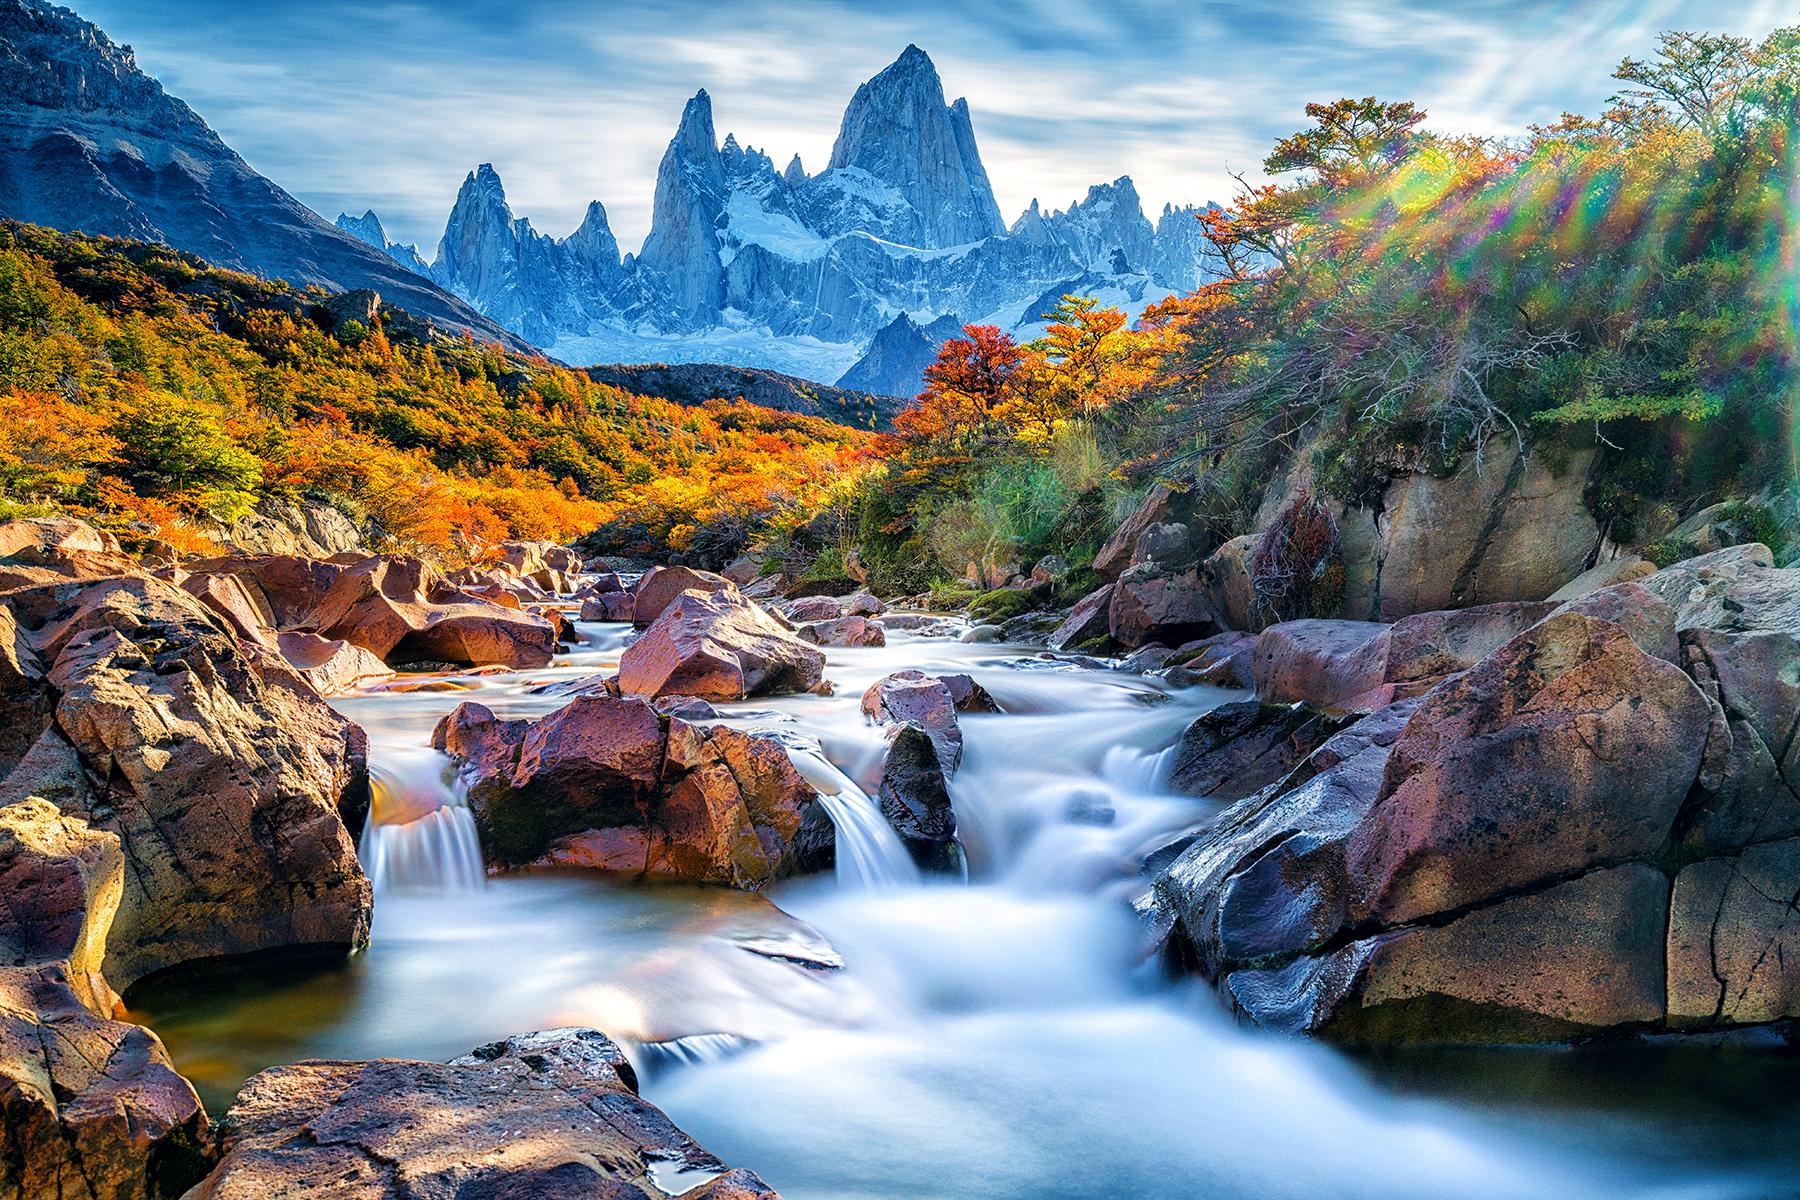 Best Things to See and Do in Argentina